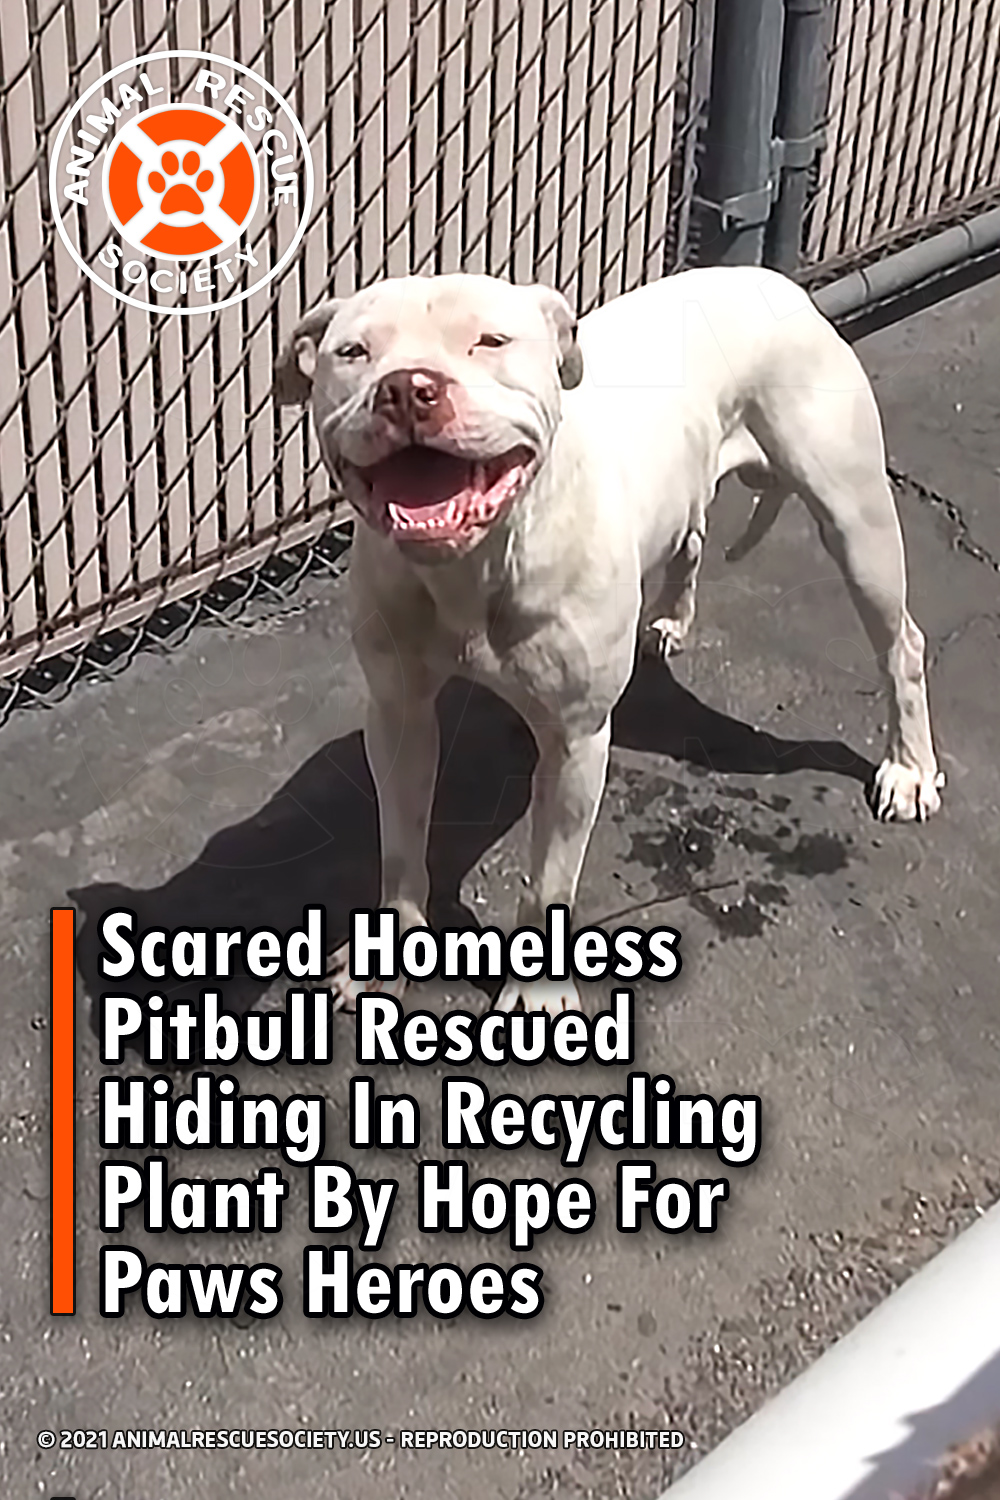 Scared Homeless Pitbull Rescued Hiding In Recycling Plant By Hope For Paws Heroes